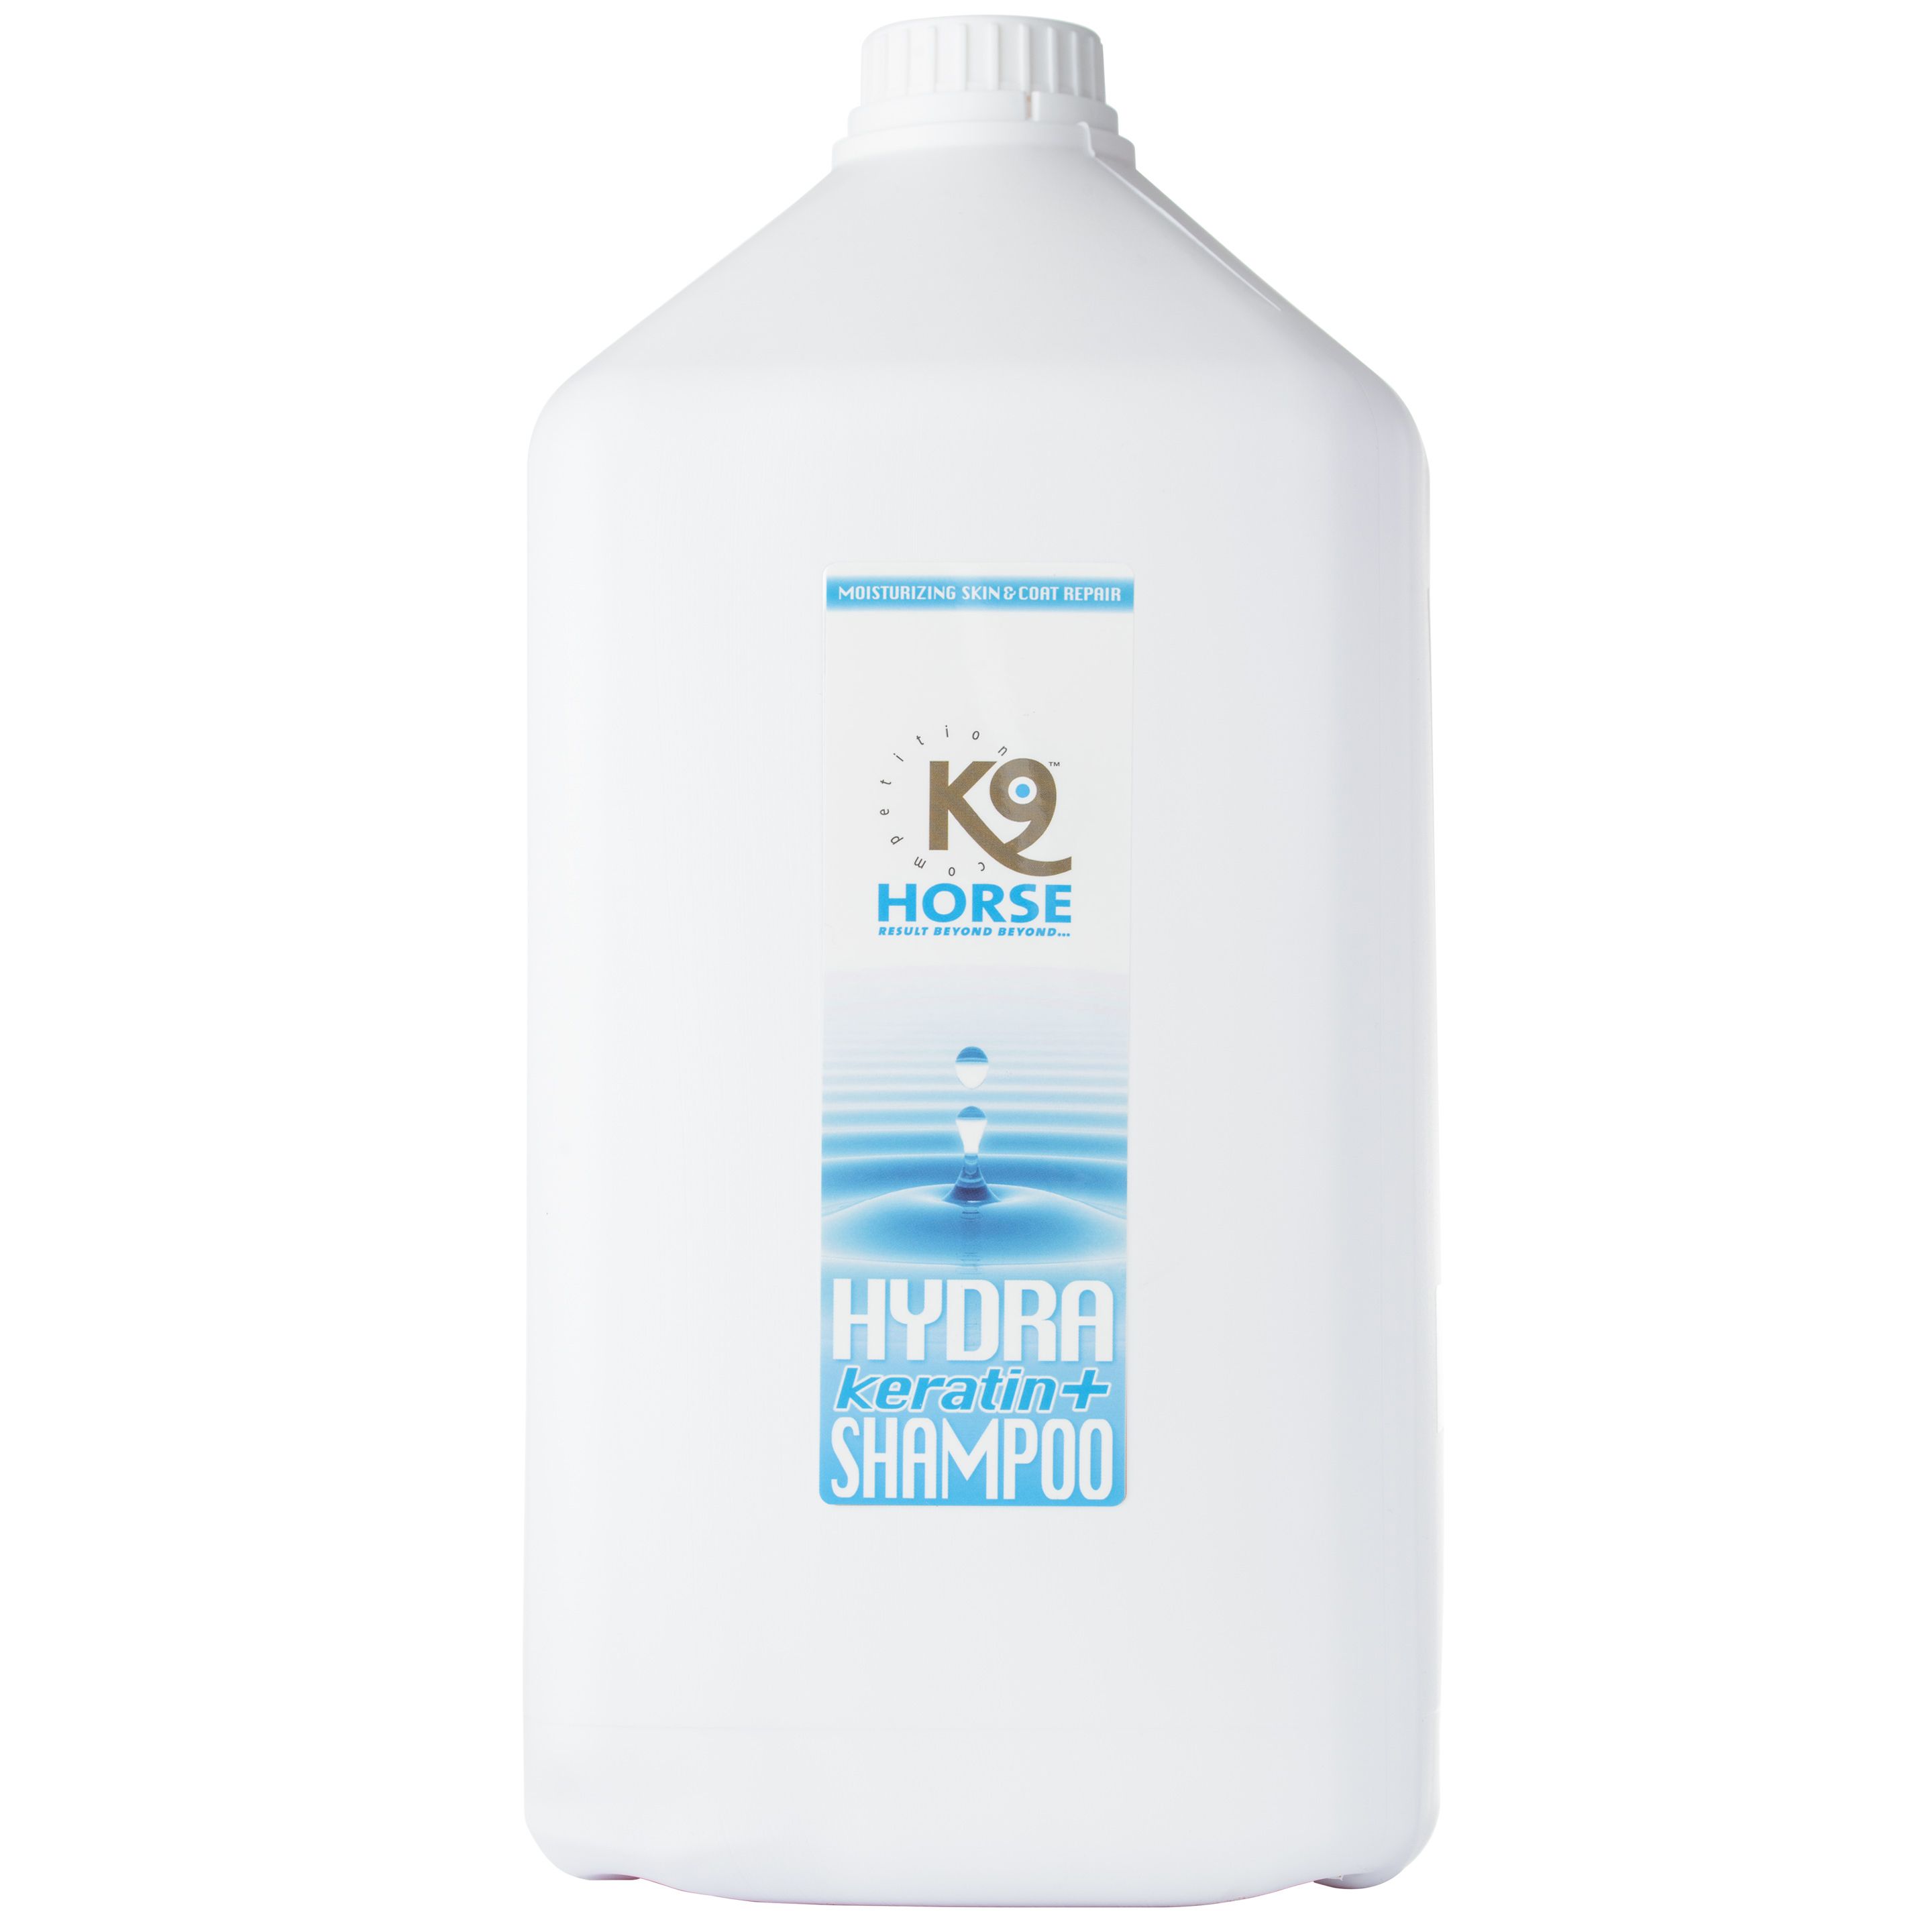 K9 Horse Grooming Sponge - Cellulose Made, Soft and Delicate